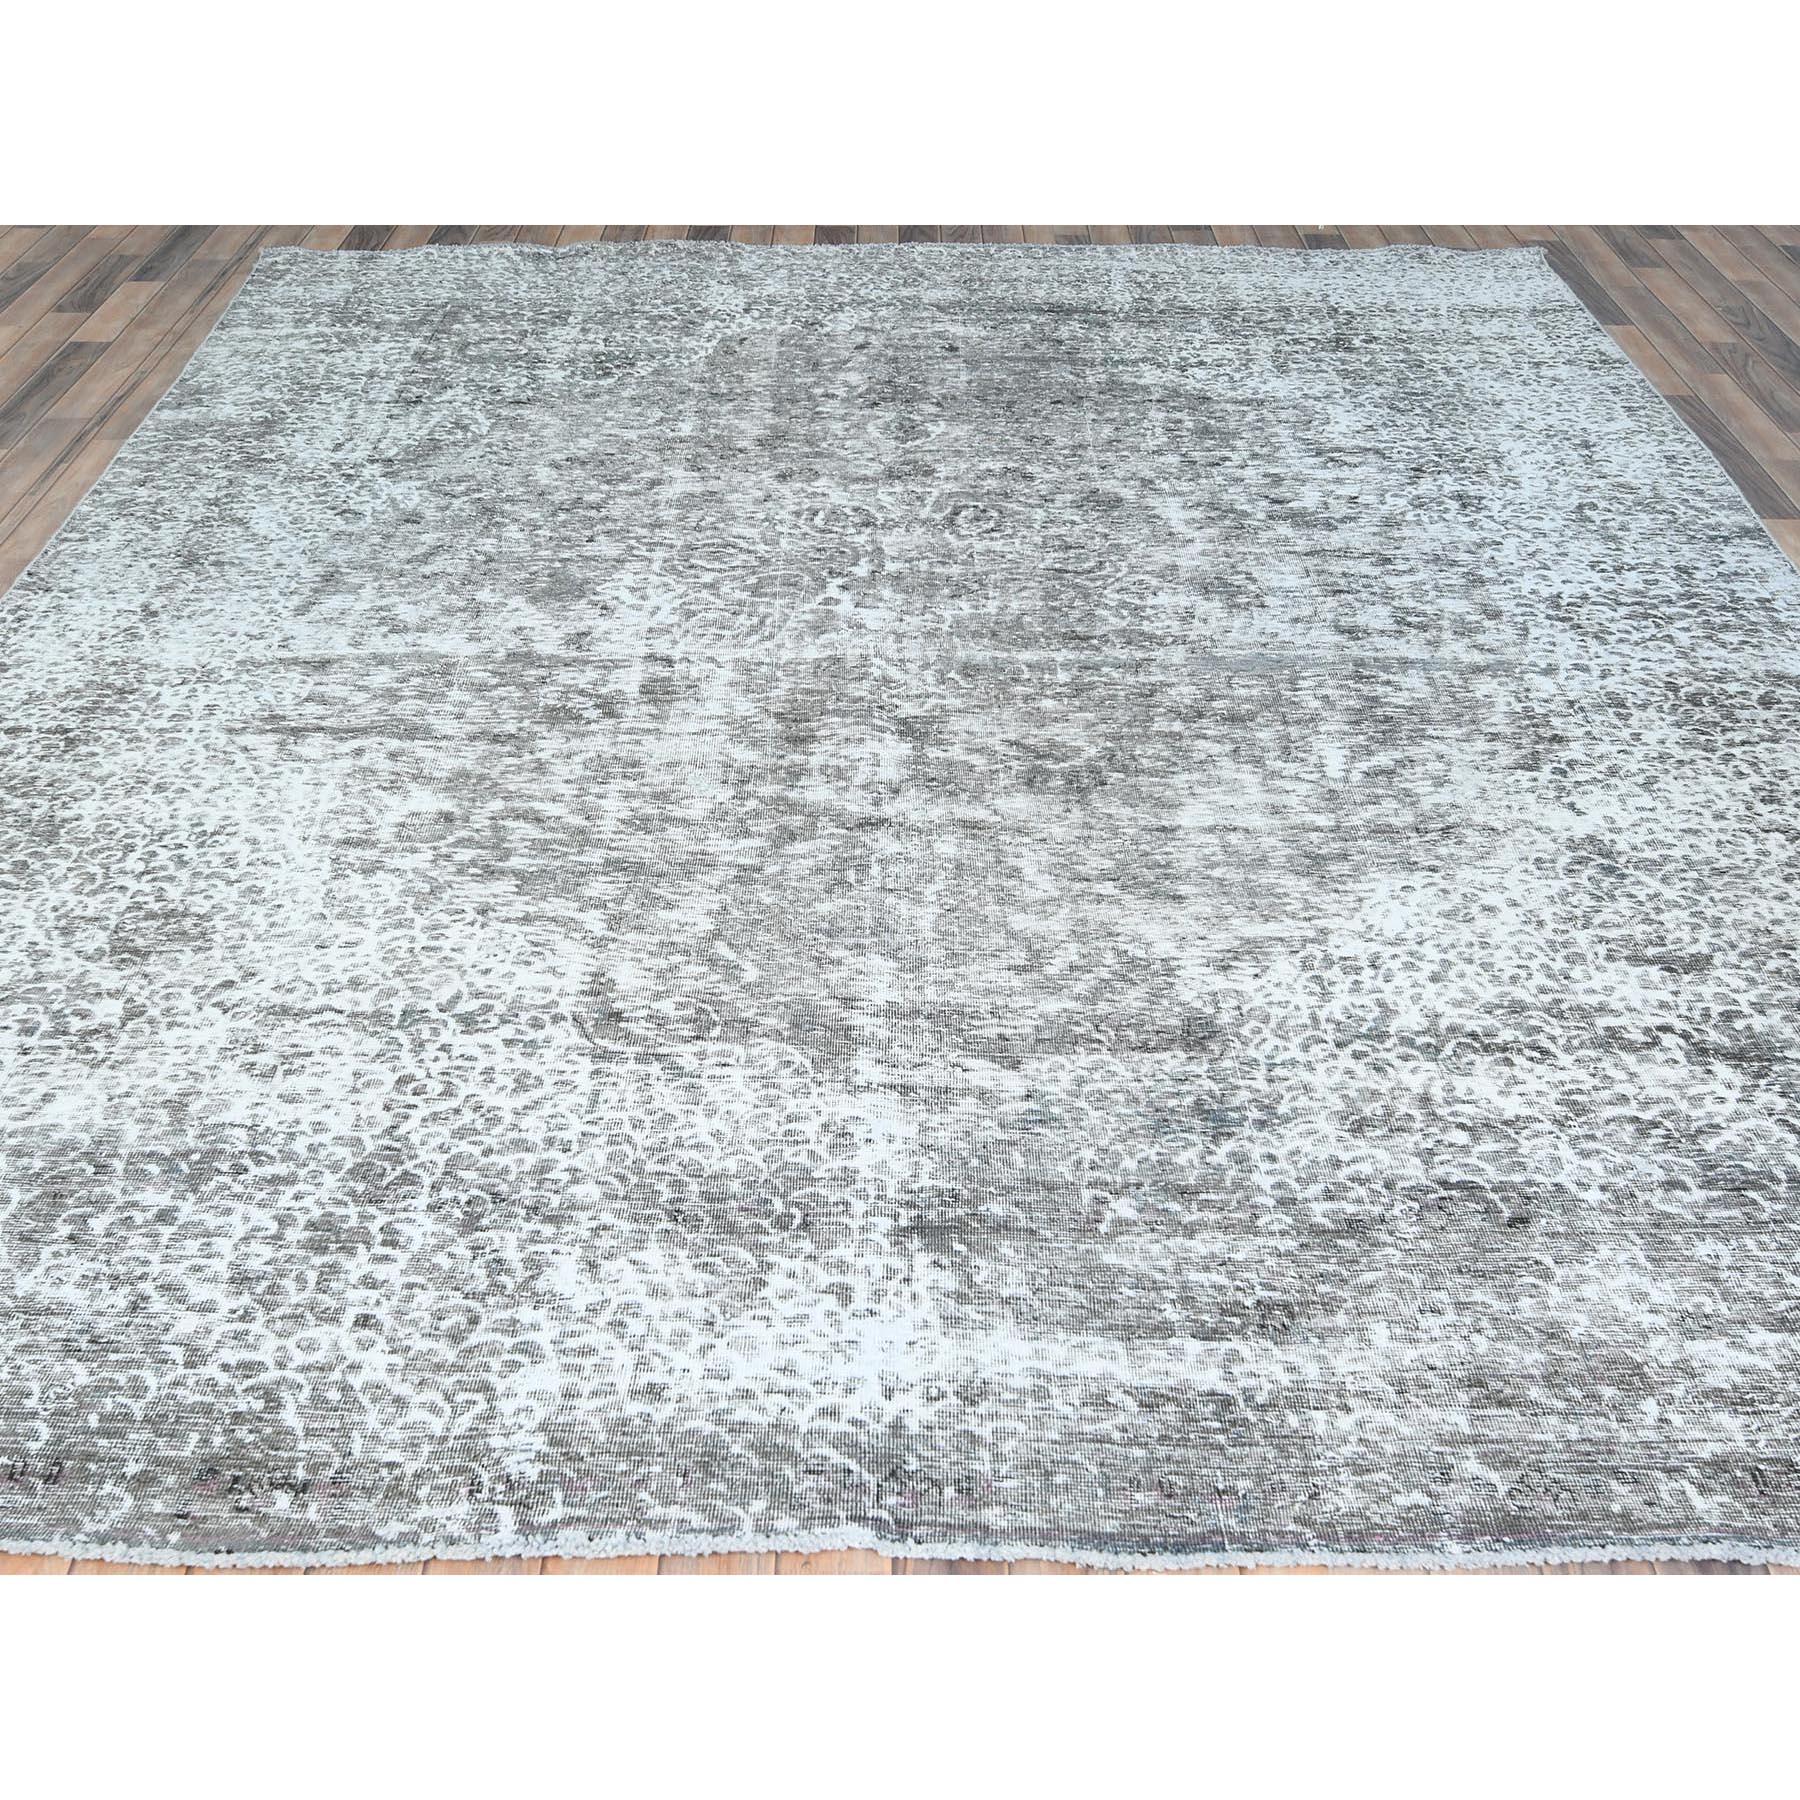 Medieval Stone Gray Worn Down Rustic Feel Worn Wool Hand Knotted Old Persian Tabriz Rug For Sale